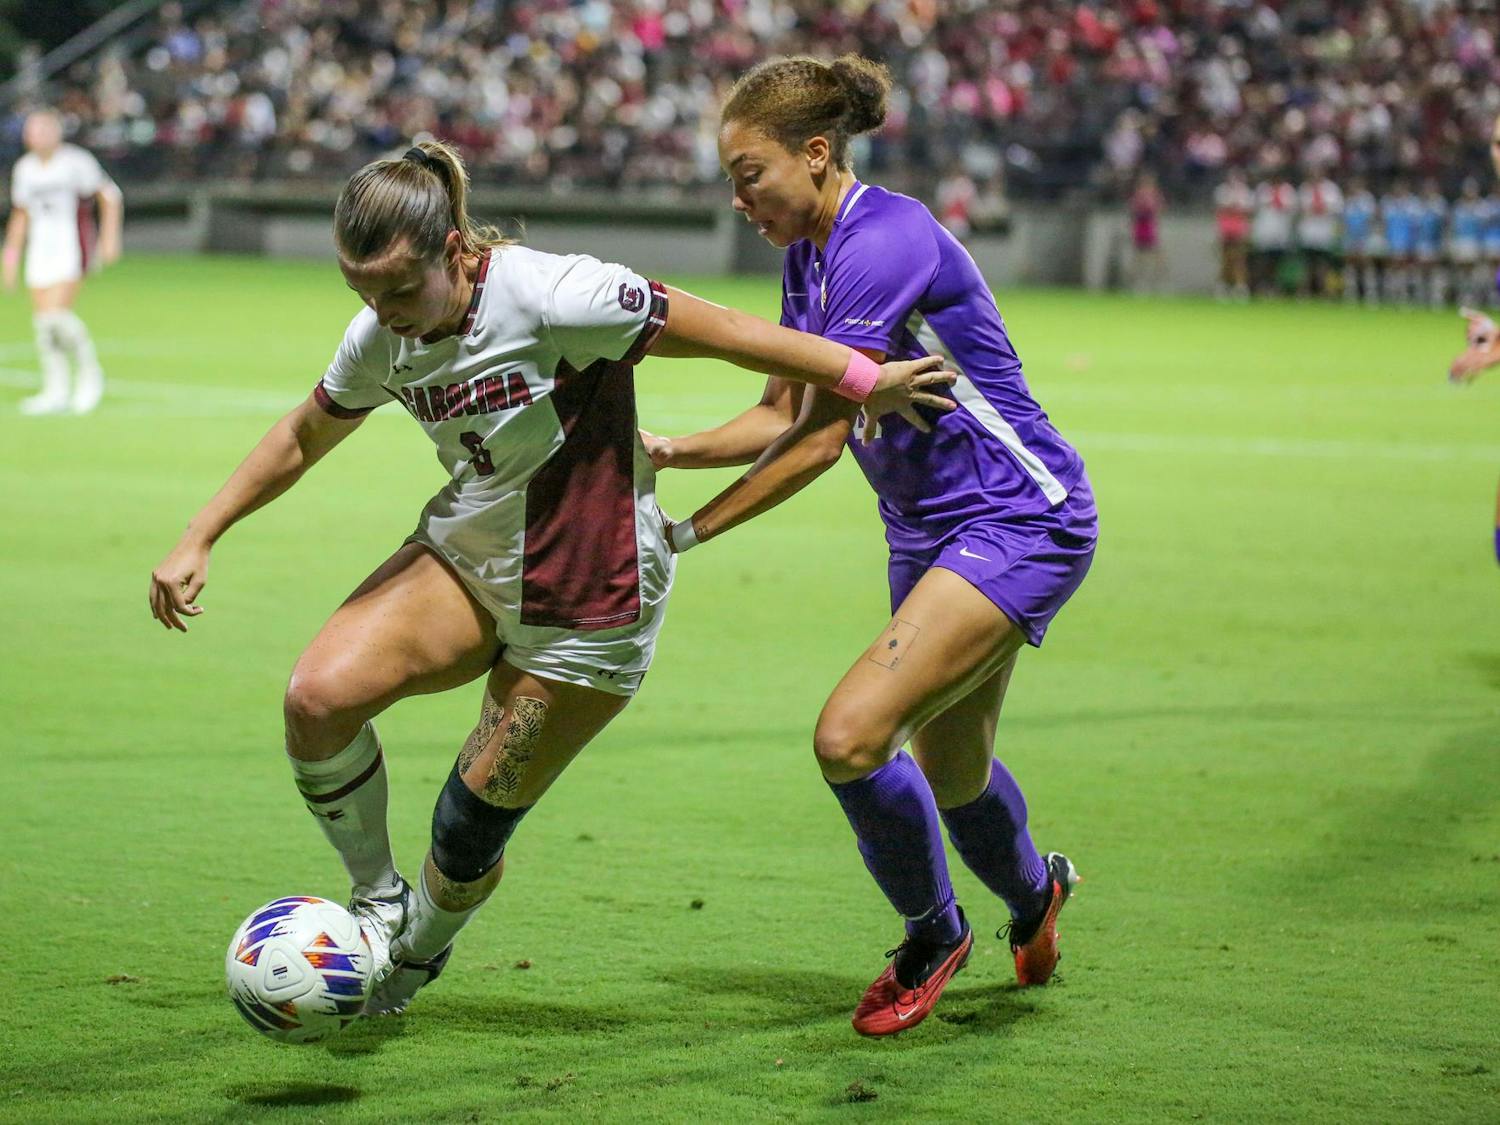 Senior defender Hallie Meadows fends off an opponent during South Carolina’s match against LSU at Stone Stadium on Oct. 5, 2023. The Gamecocks beat the Tigers 1-0.